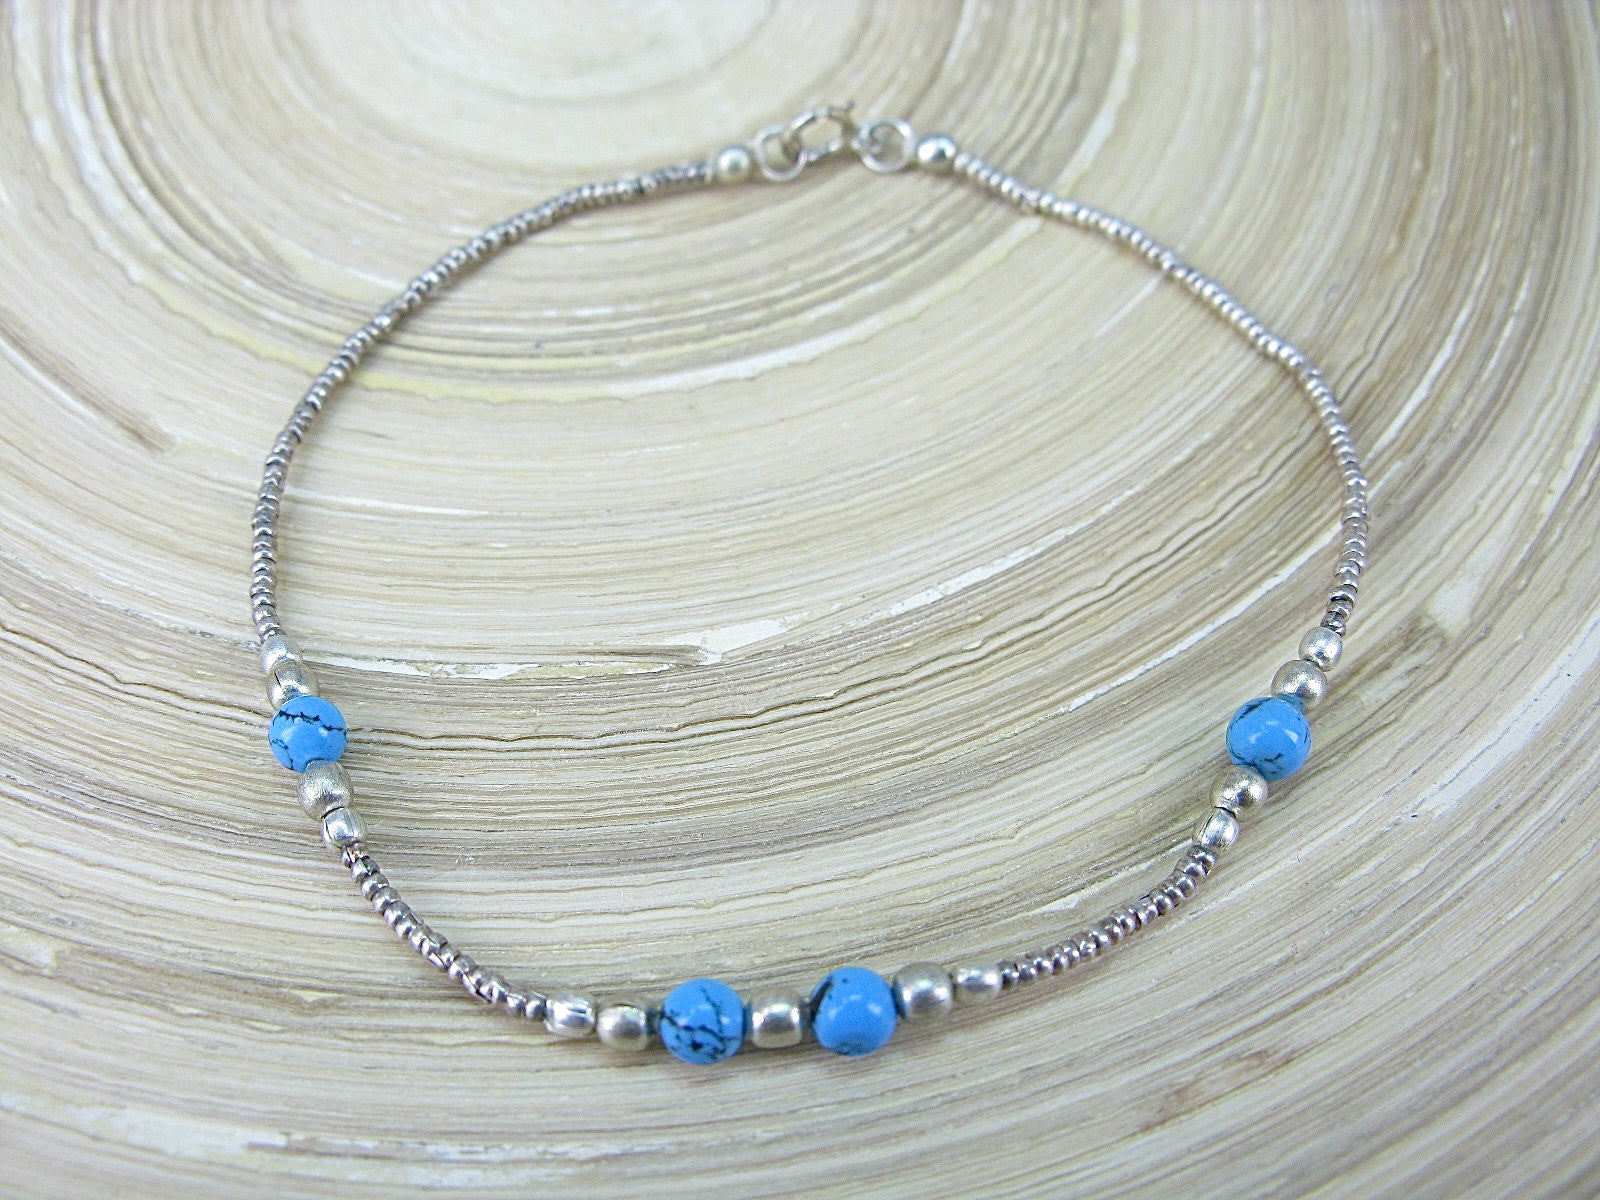 Turquoise Bead Tribal Oxidized 925 Sterling Silver Bracelet